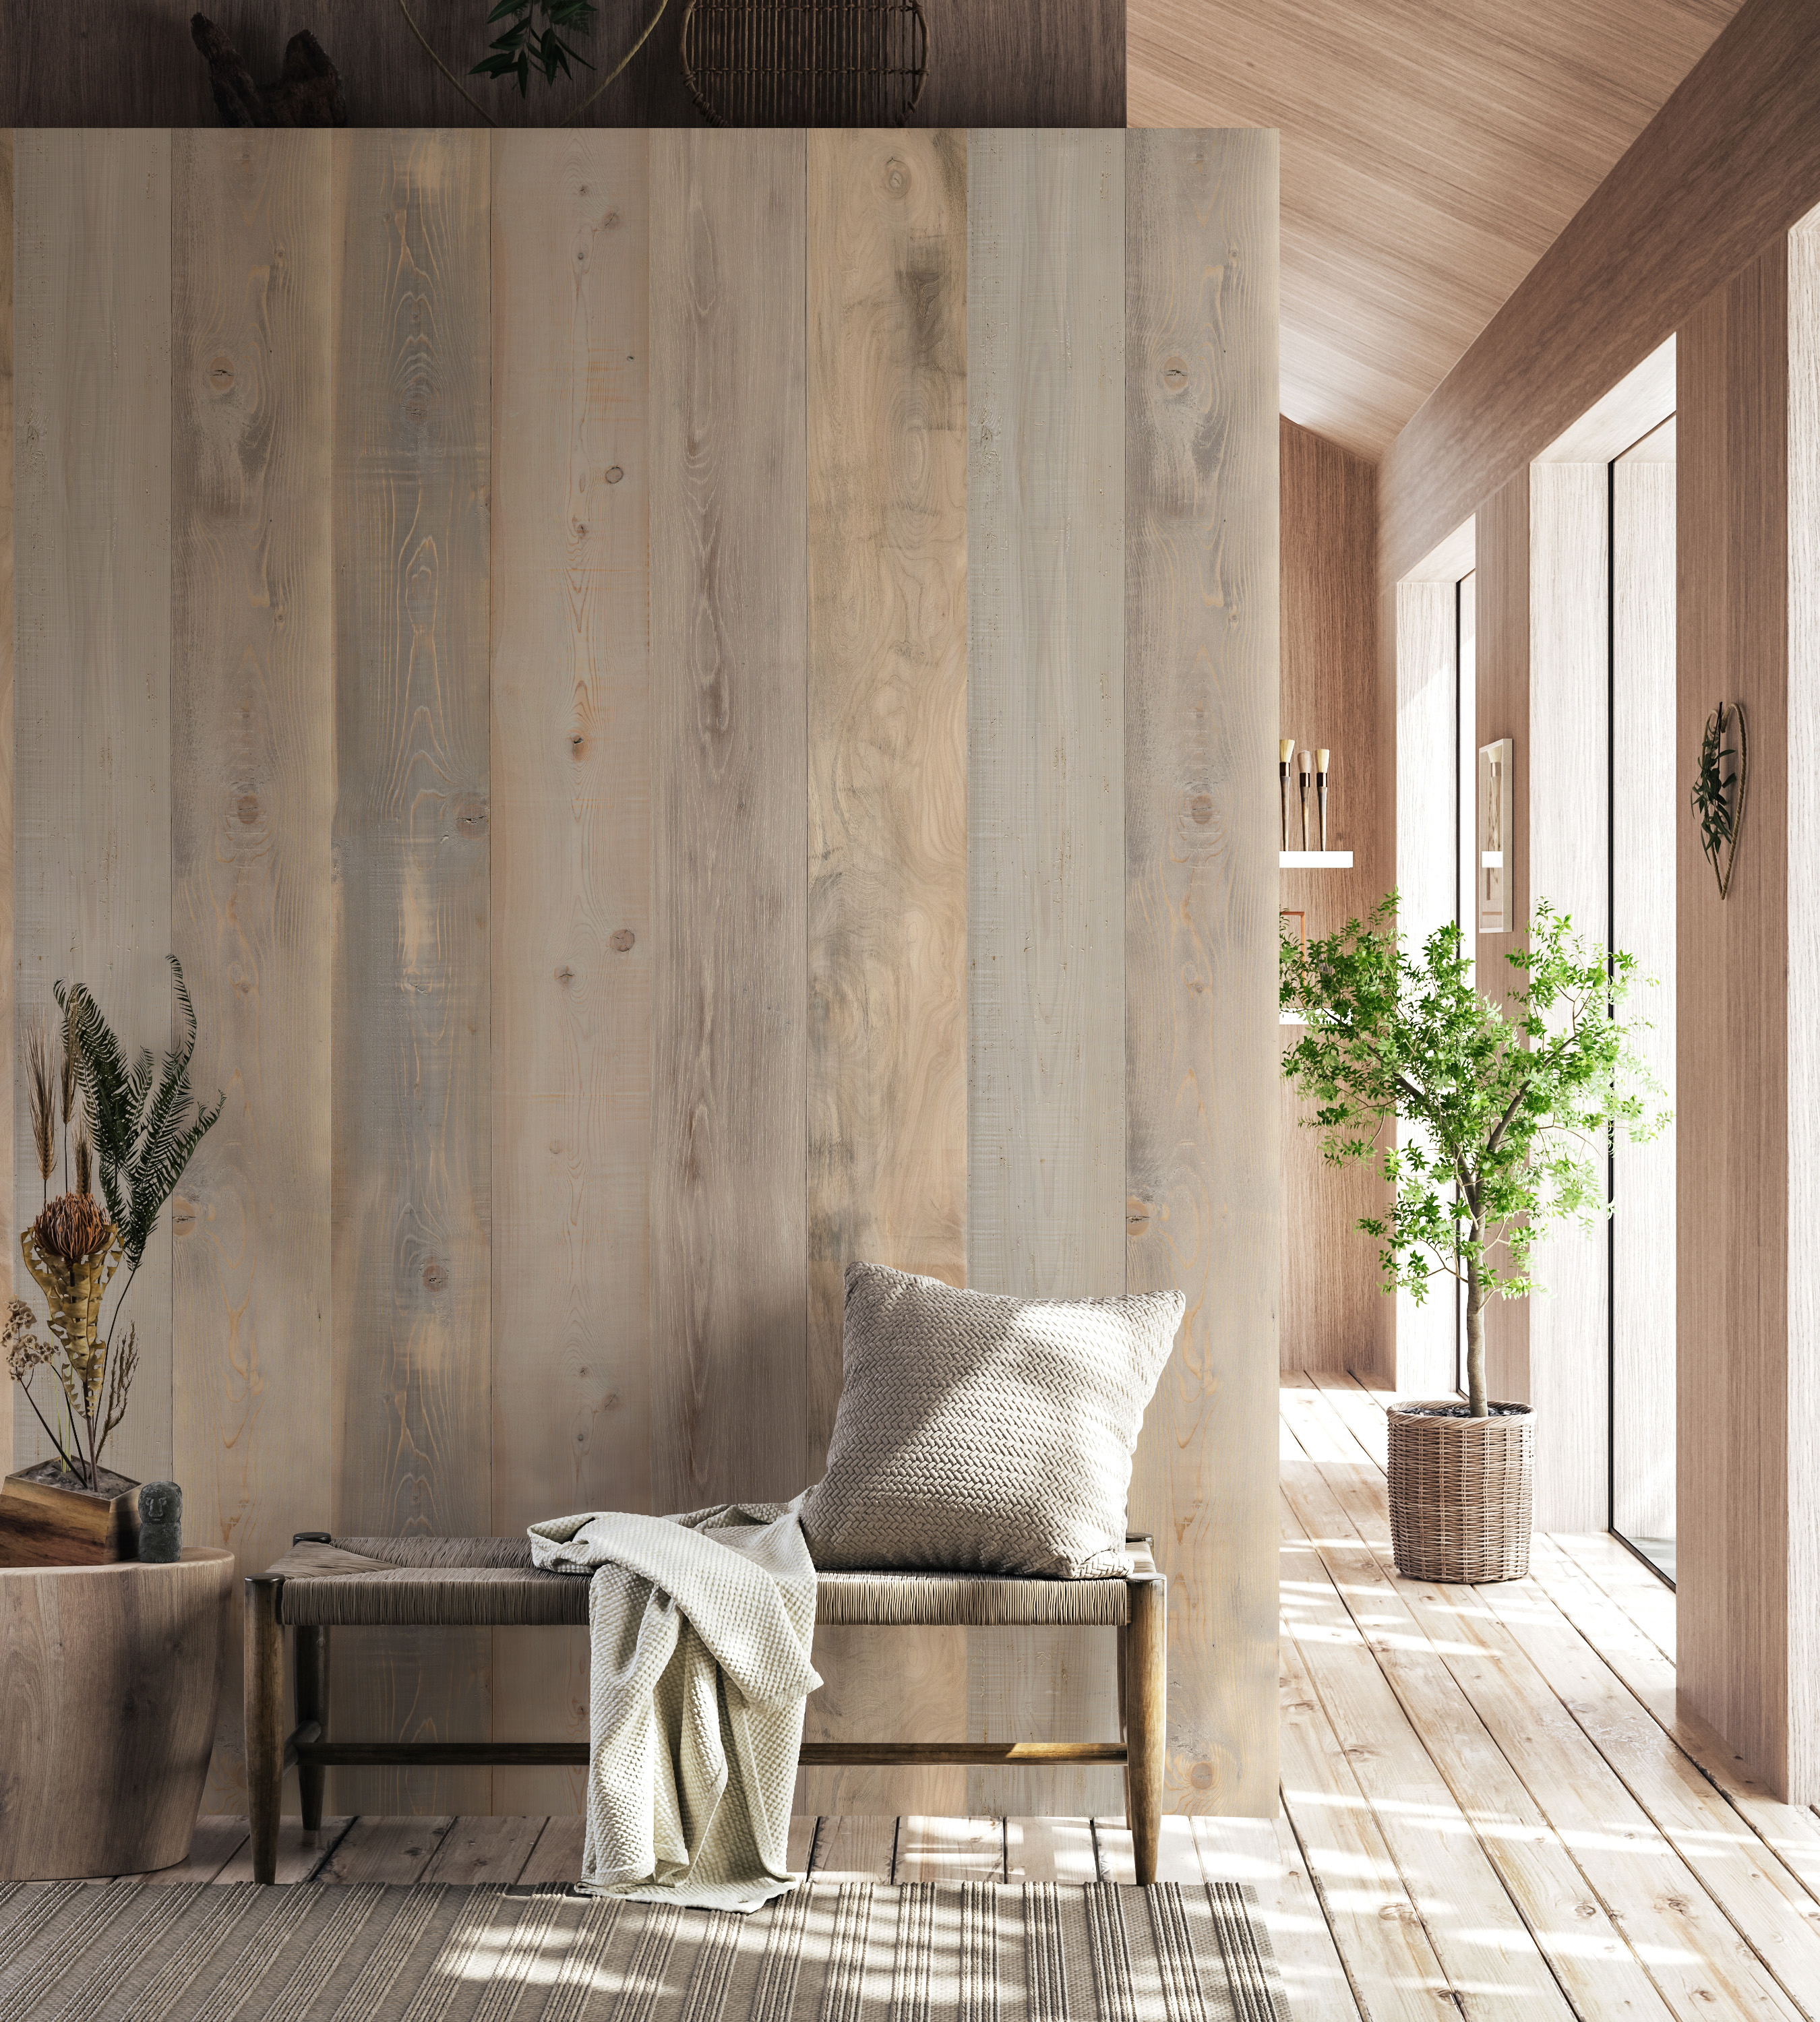 Sunny wooden house setting with Norse wall panels